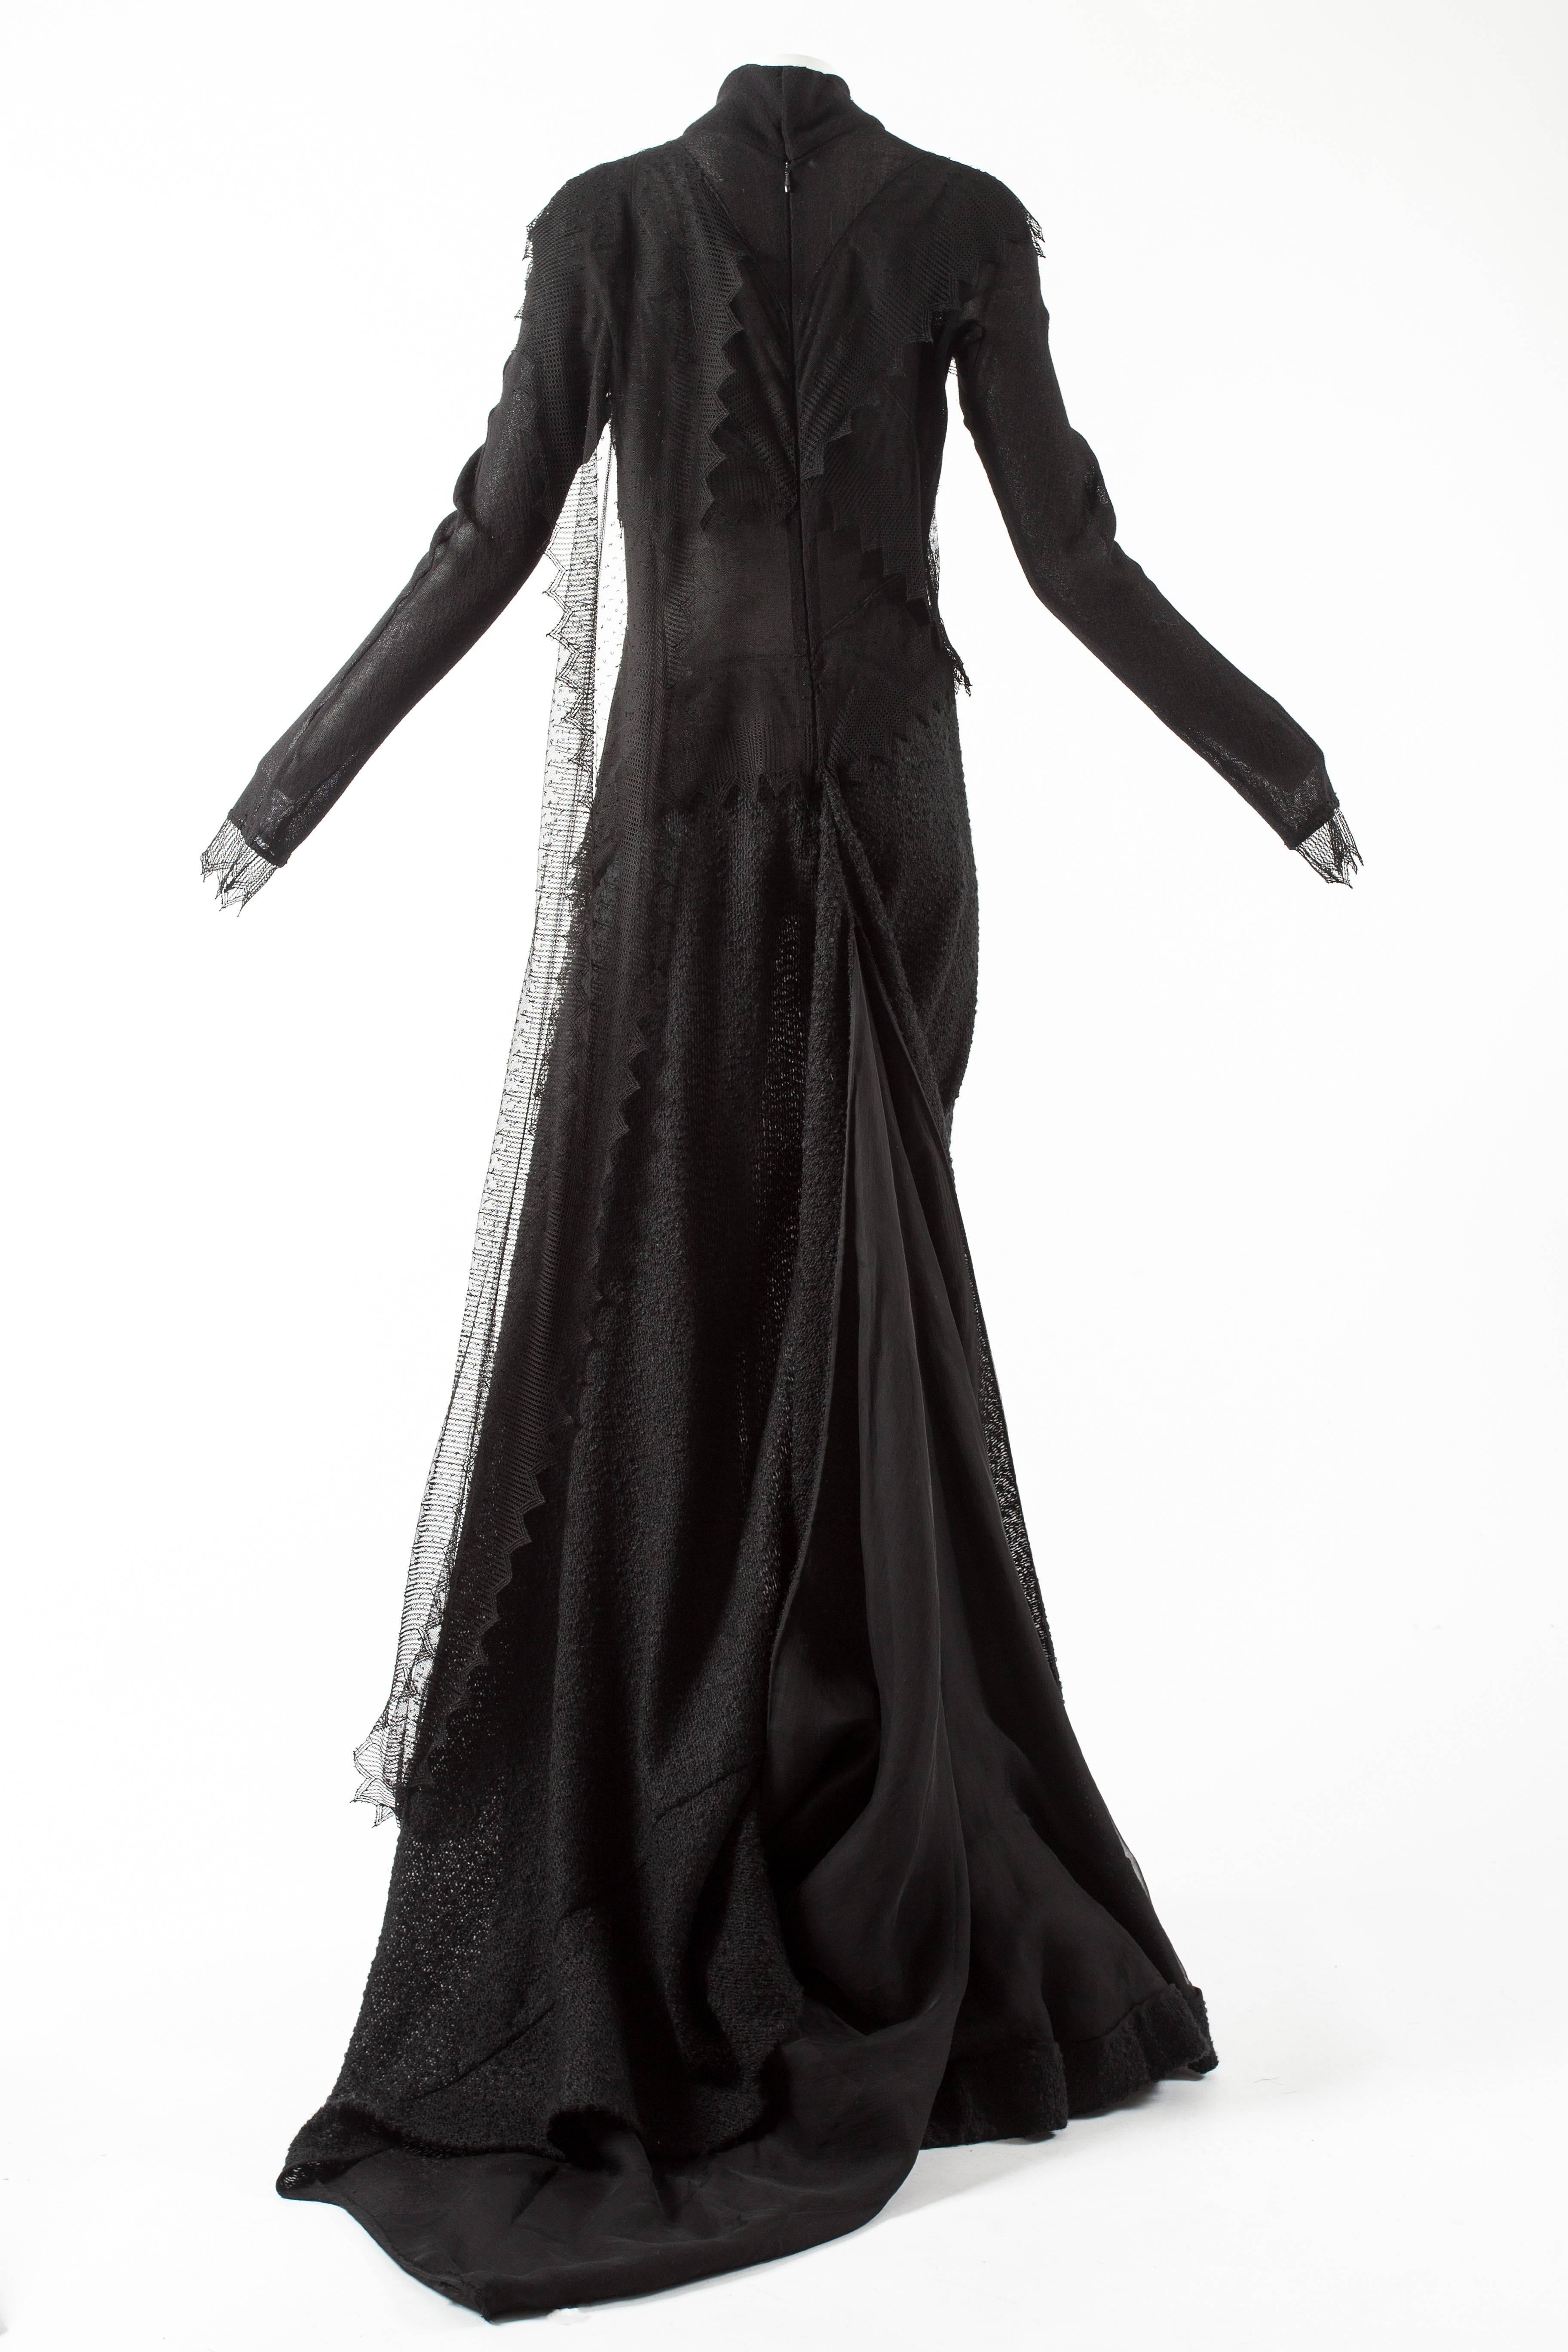 Ocimar Versolato Haute Couture black bouclé wool and knitted lace dress, fw 1998 In Excellent Condition For Sale In London, GB